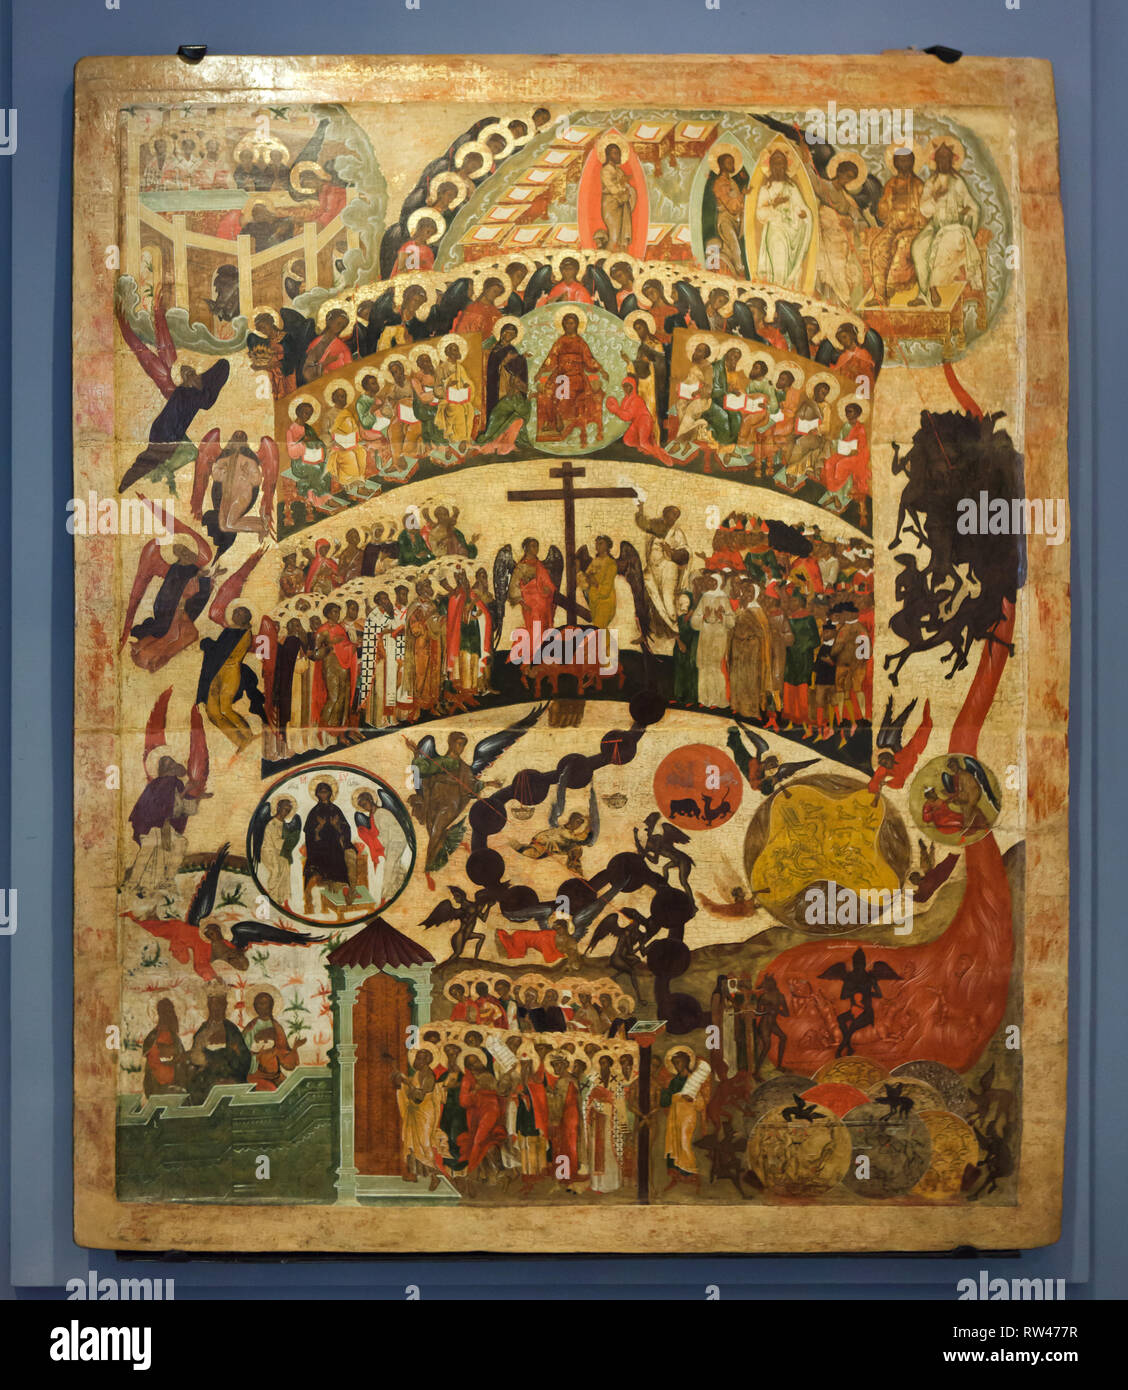 Last Judgment. Russian icon of the Yaroslavl icon painting school dated from the middle of the 16th century on display in the Yaroslavl Art Museum in Yaroslavl, Russia. Stock Photo